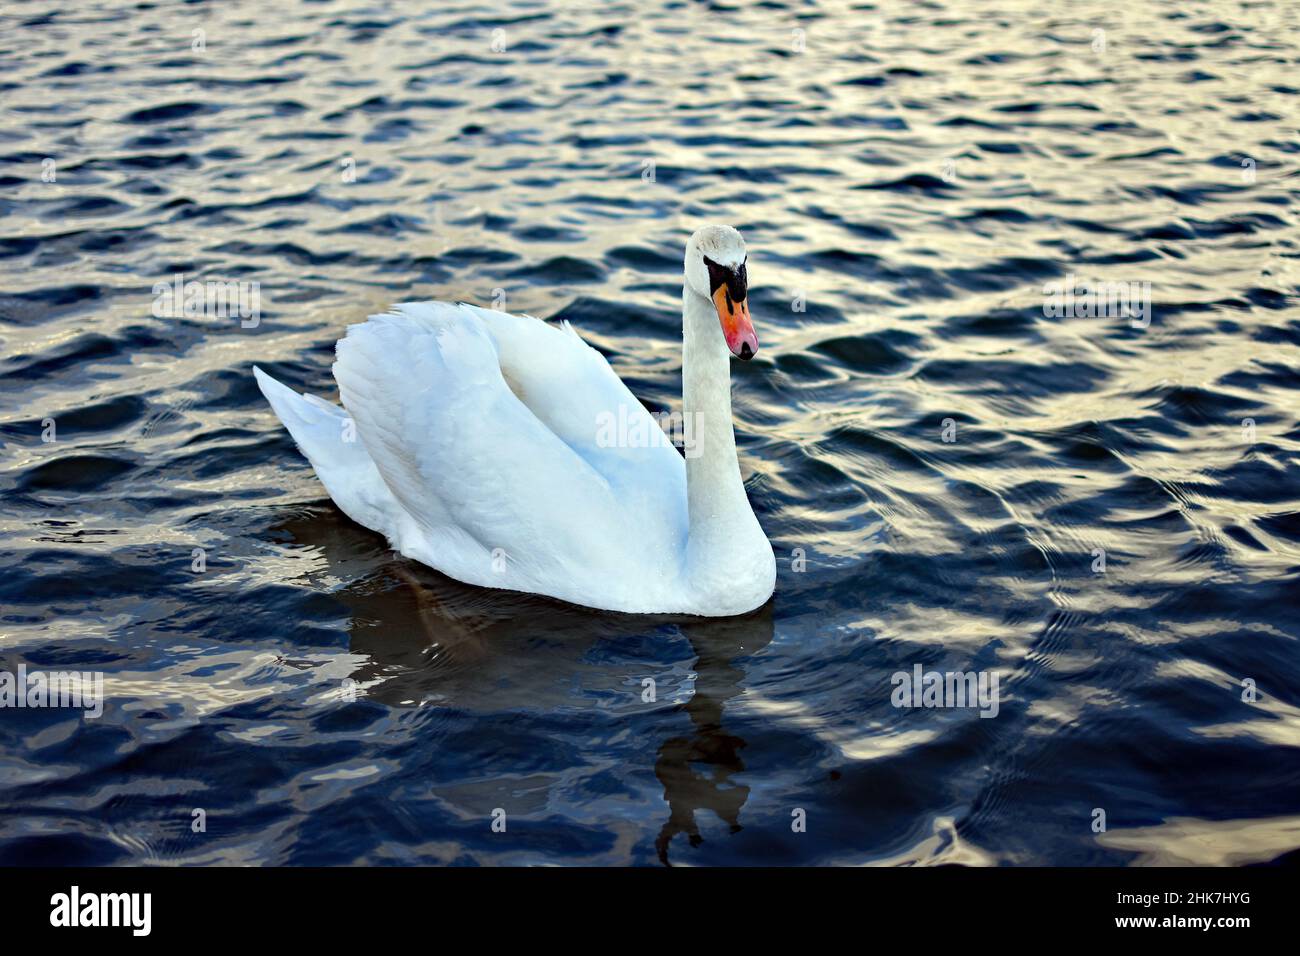 A swan ( cygnus ) in the water of Dovercourt Boating Lake, Harwich & Dovercourt, North Essex, UK. The setting sun reflects off of the rippled water. Stock Photo